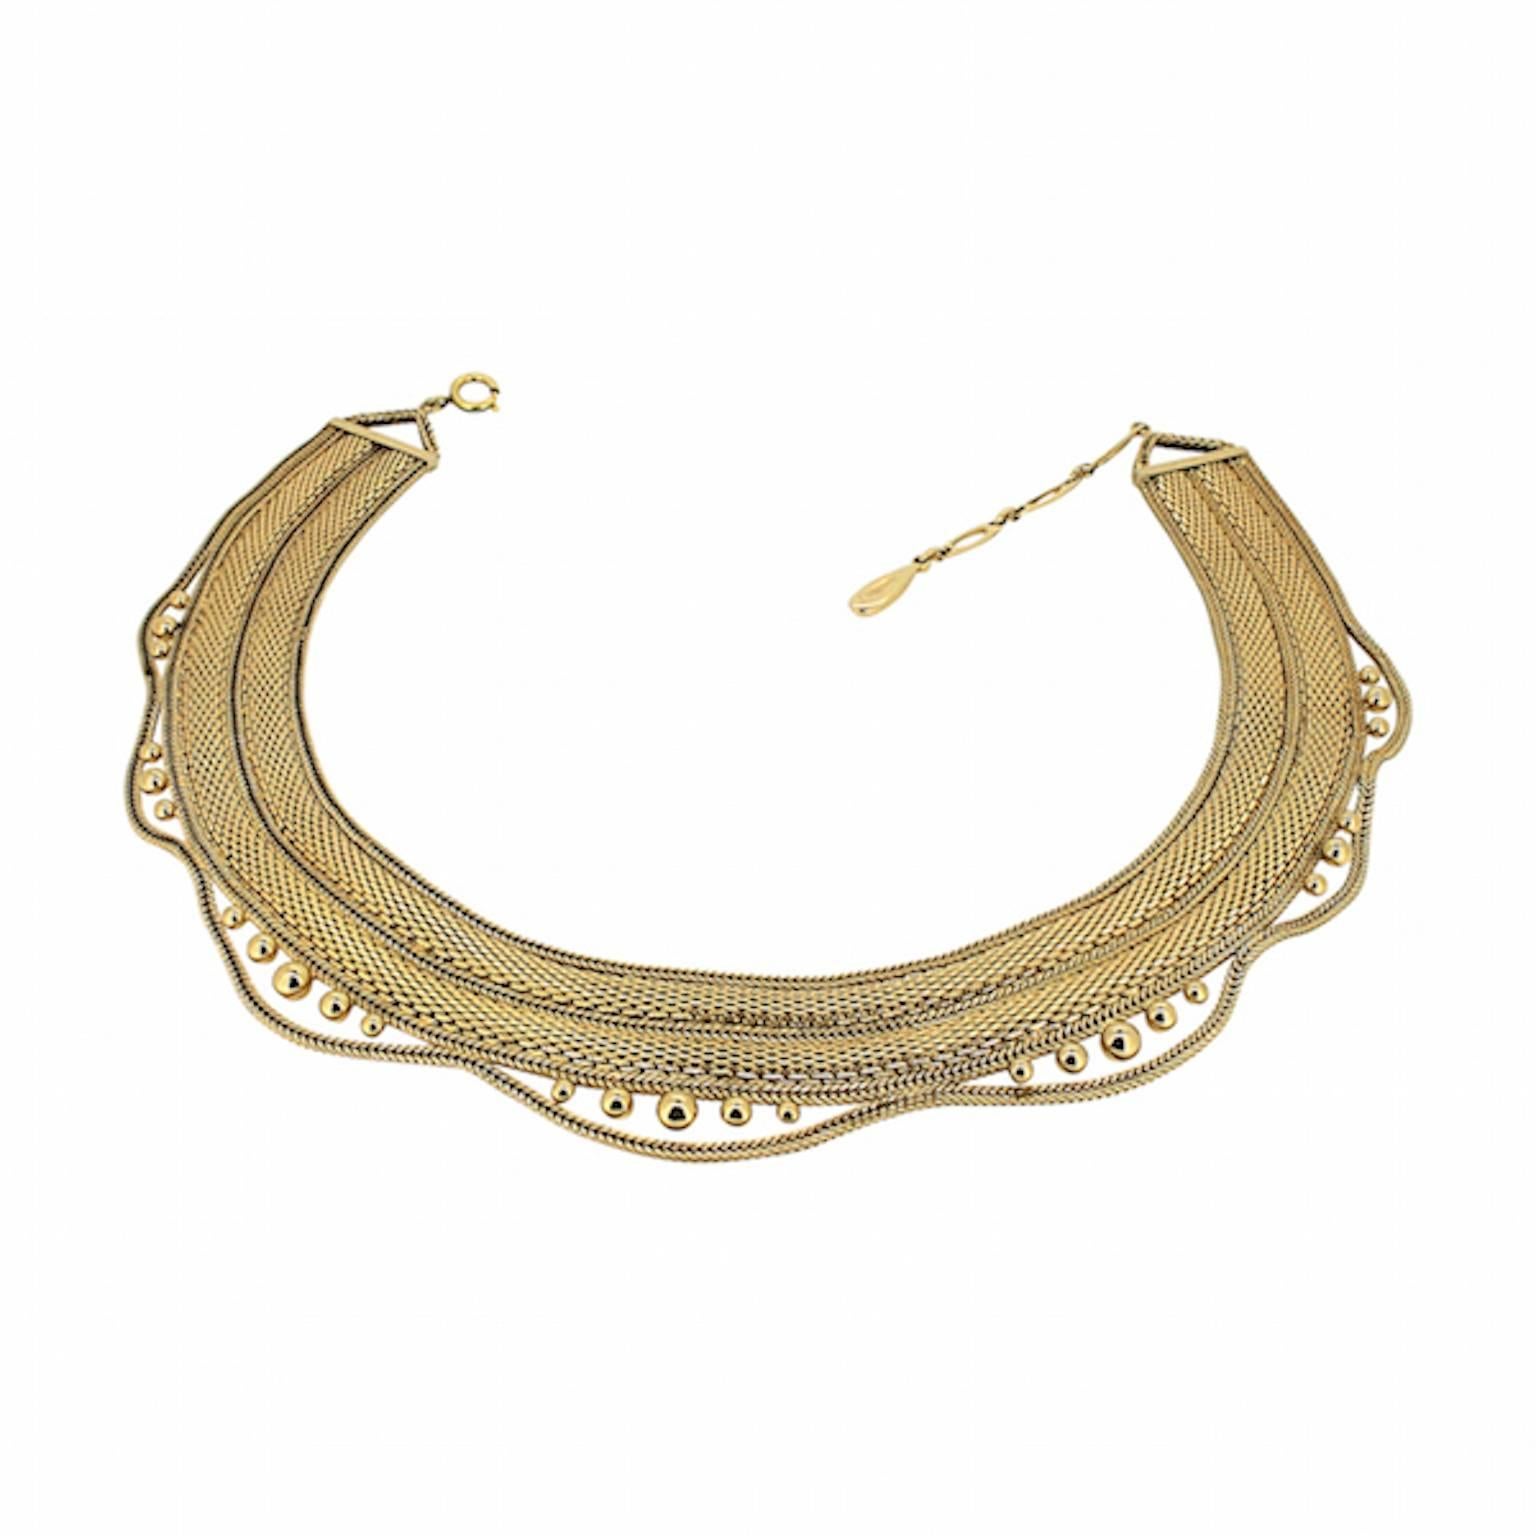 A very special piece by Christian Dior. This necklace was created in the late 1950s or early 1960s. Made in Germany, its construction and design is exemplary. 

Condition Report:
Excellent

The Details...
This stunning necklace is gold plated. The